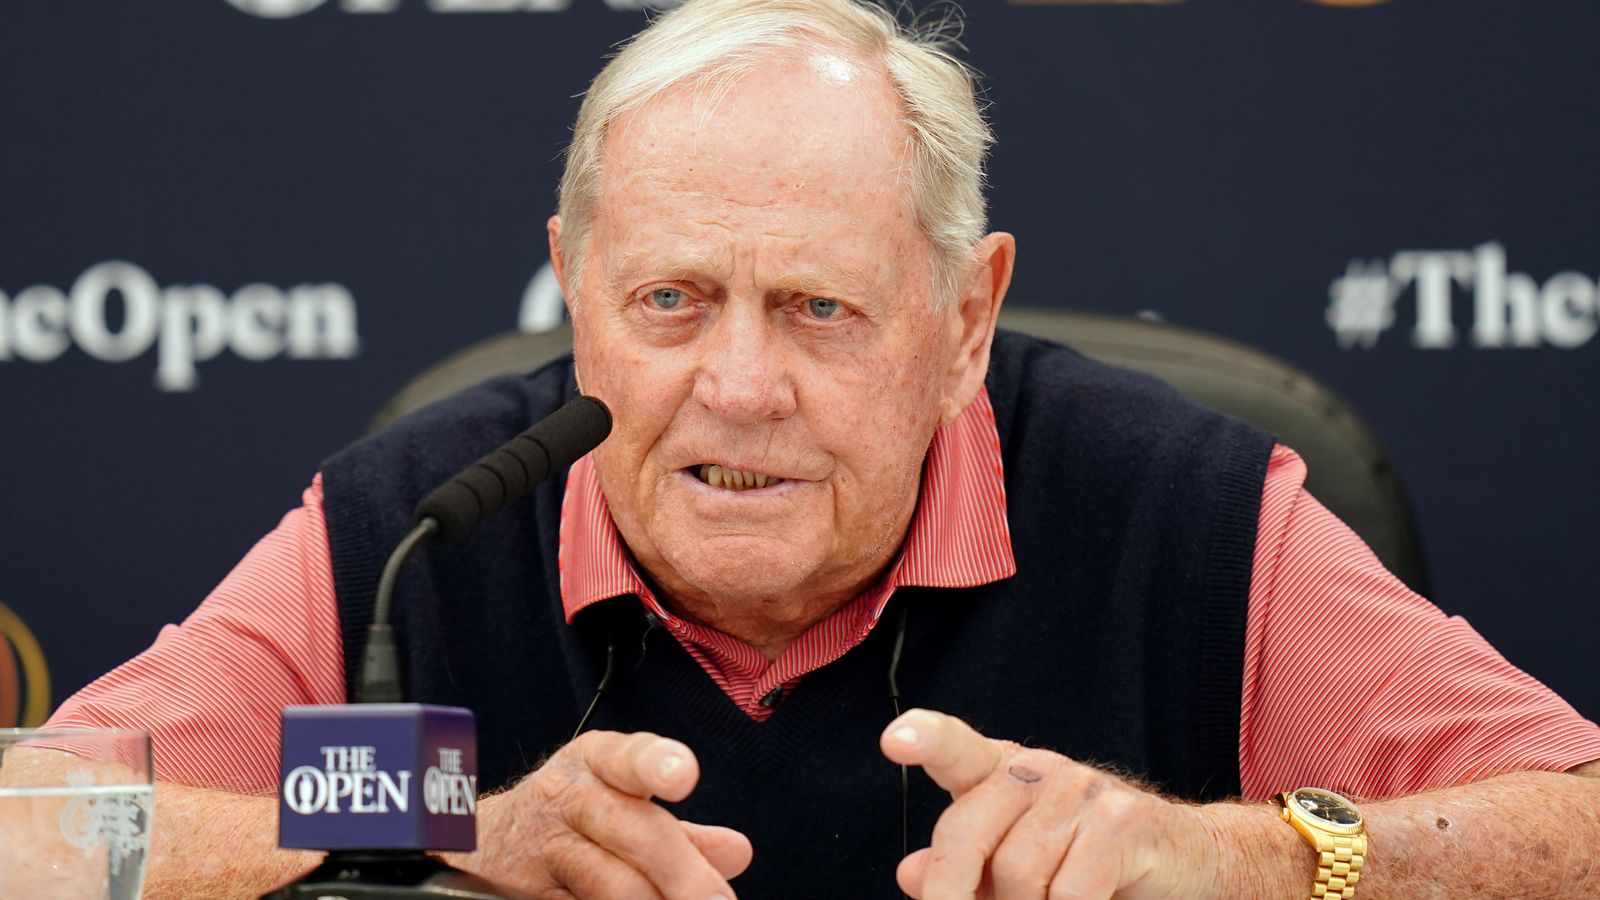 The 150th Open: Jack Nicklaus unconcerned by possibility of record scoring at St Andrews | Golf News